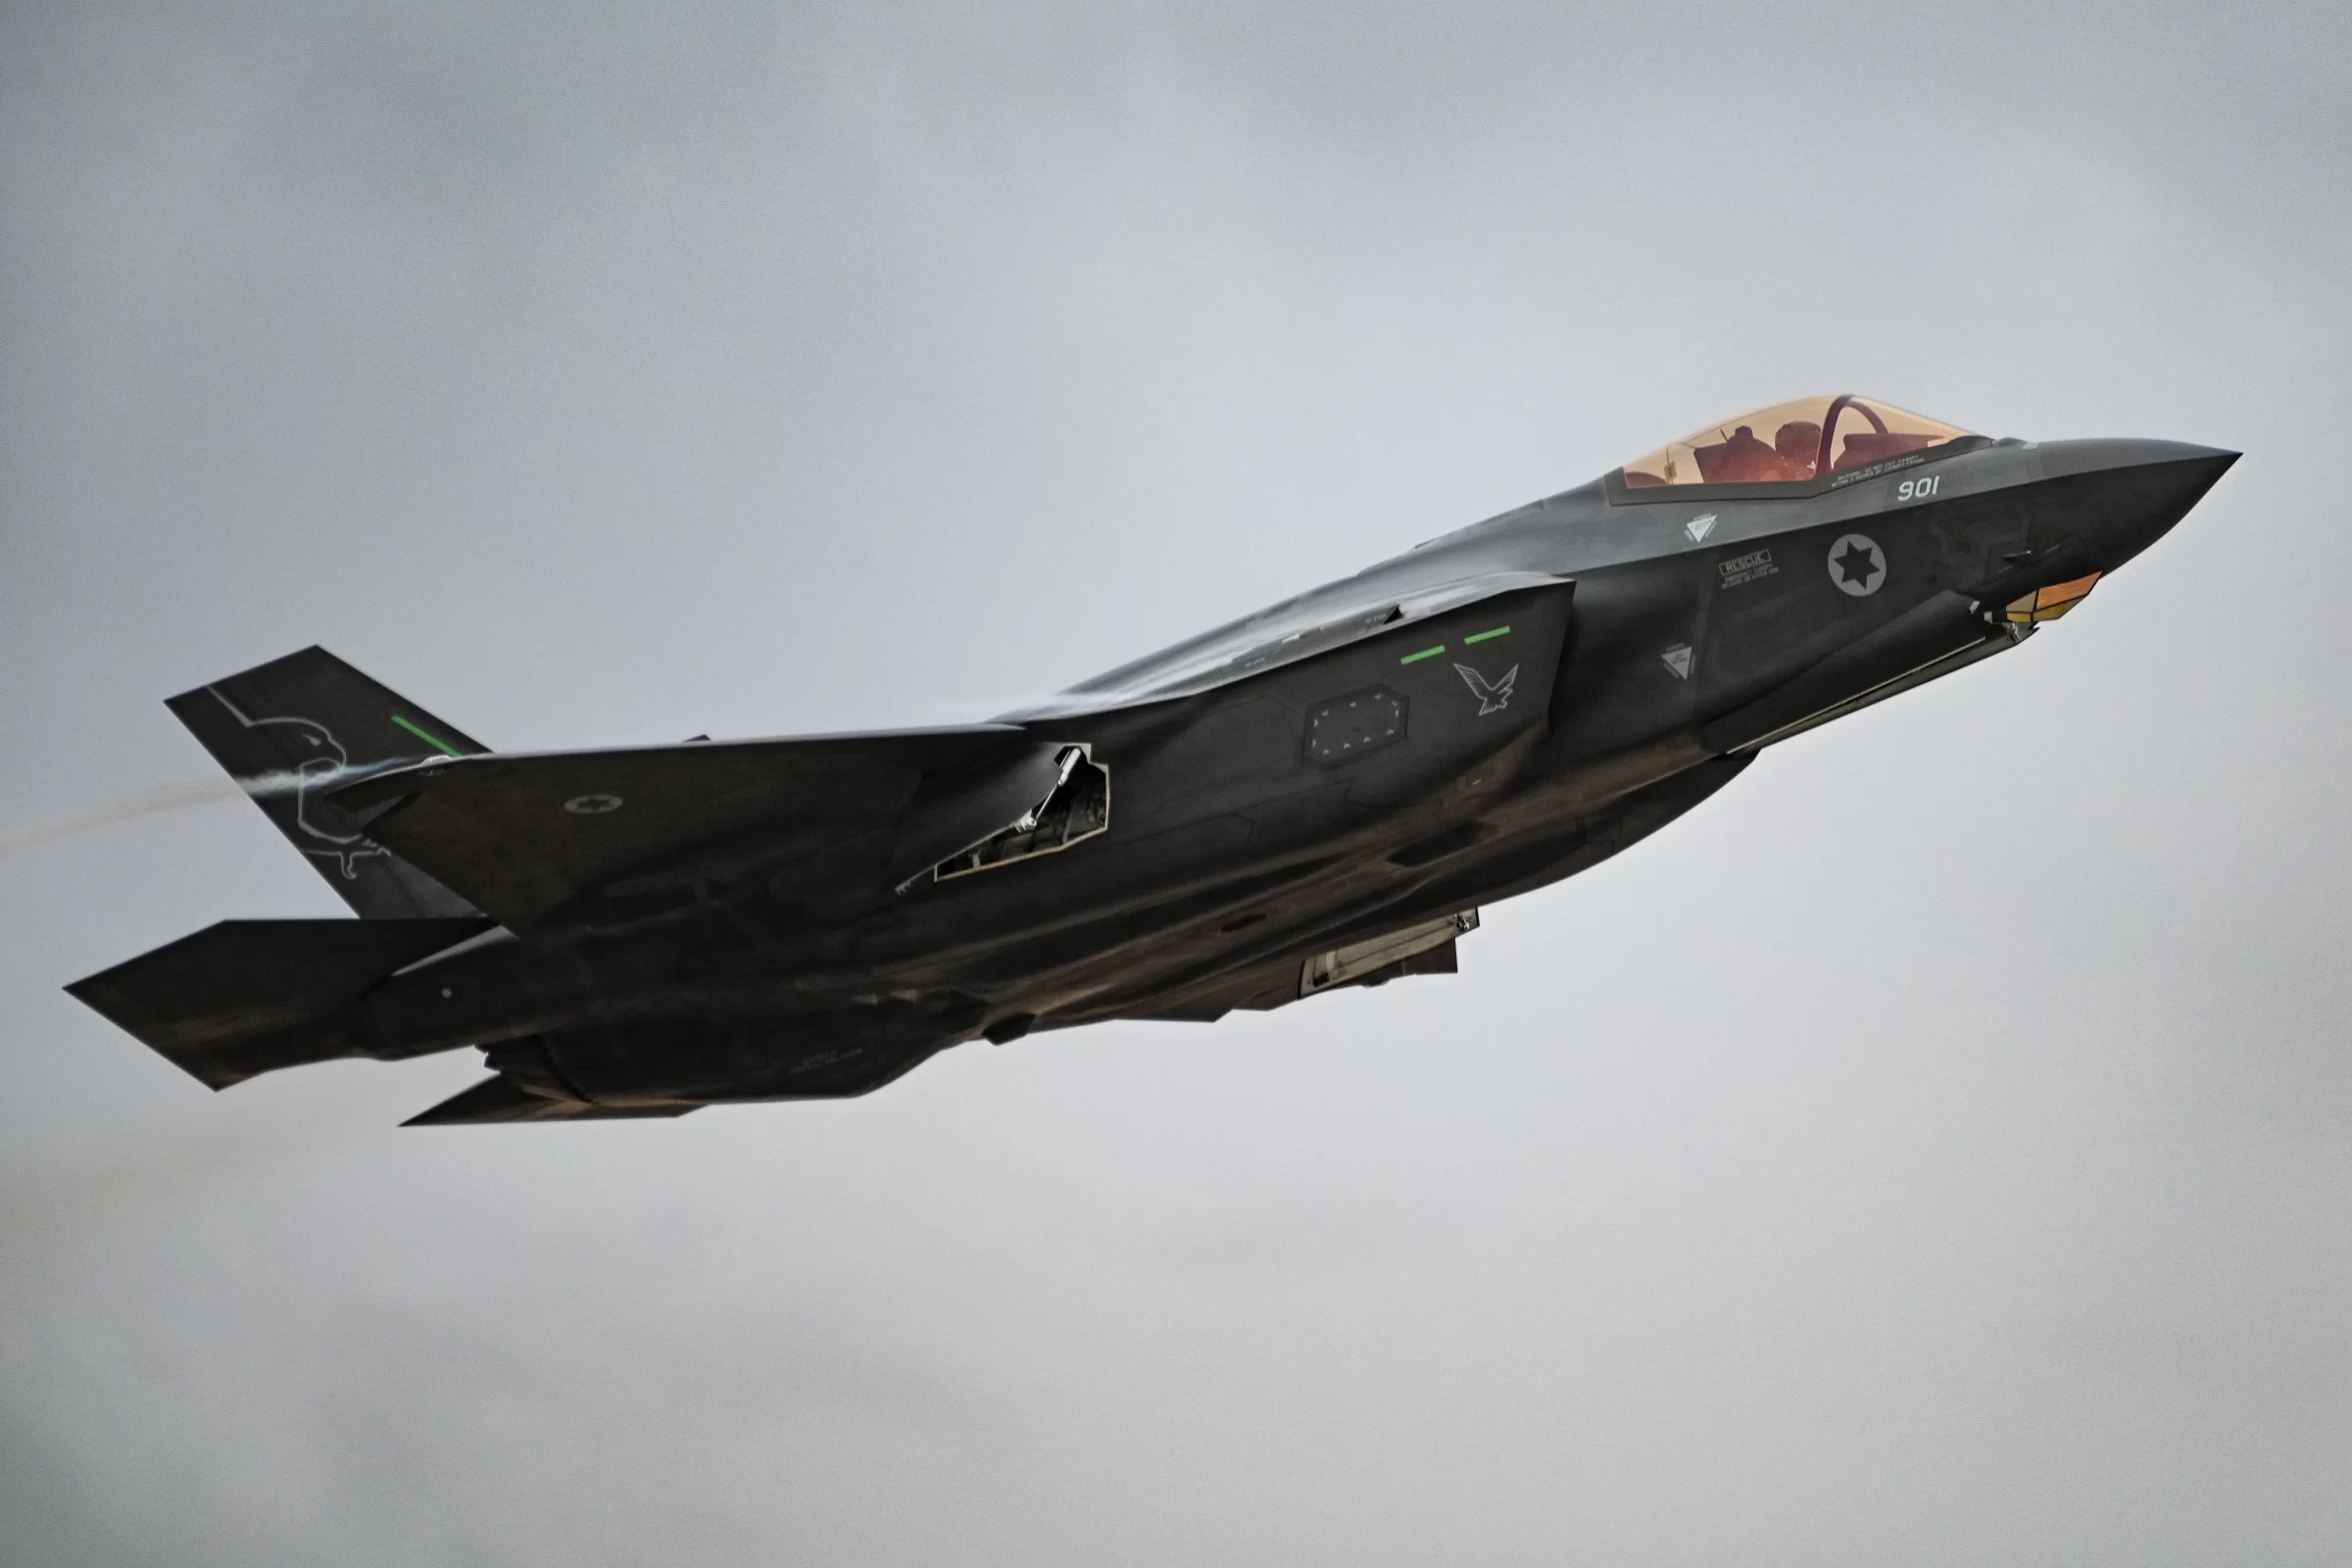 Court orders Netherlands to cease F-35 fighter jet part exports to Israel